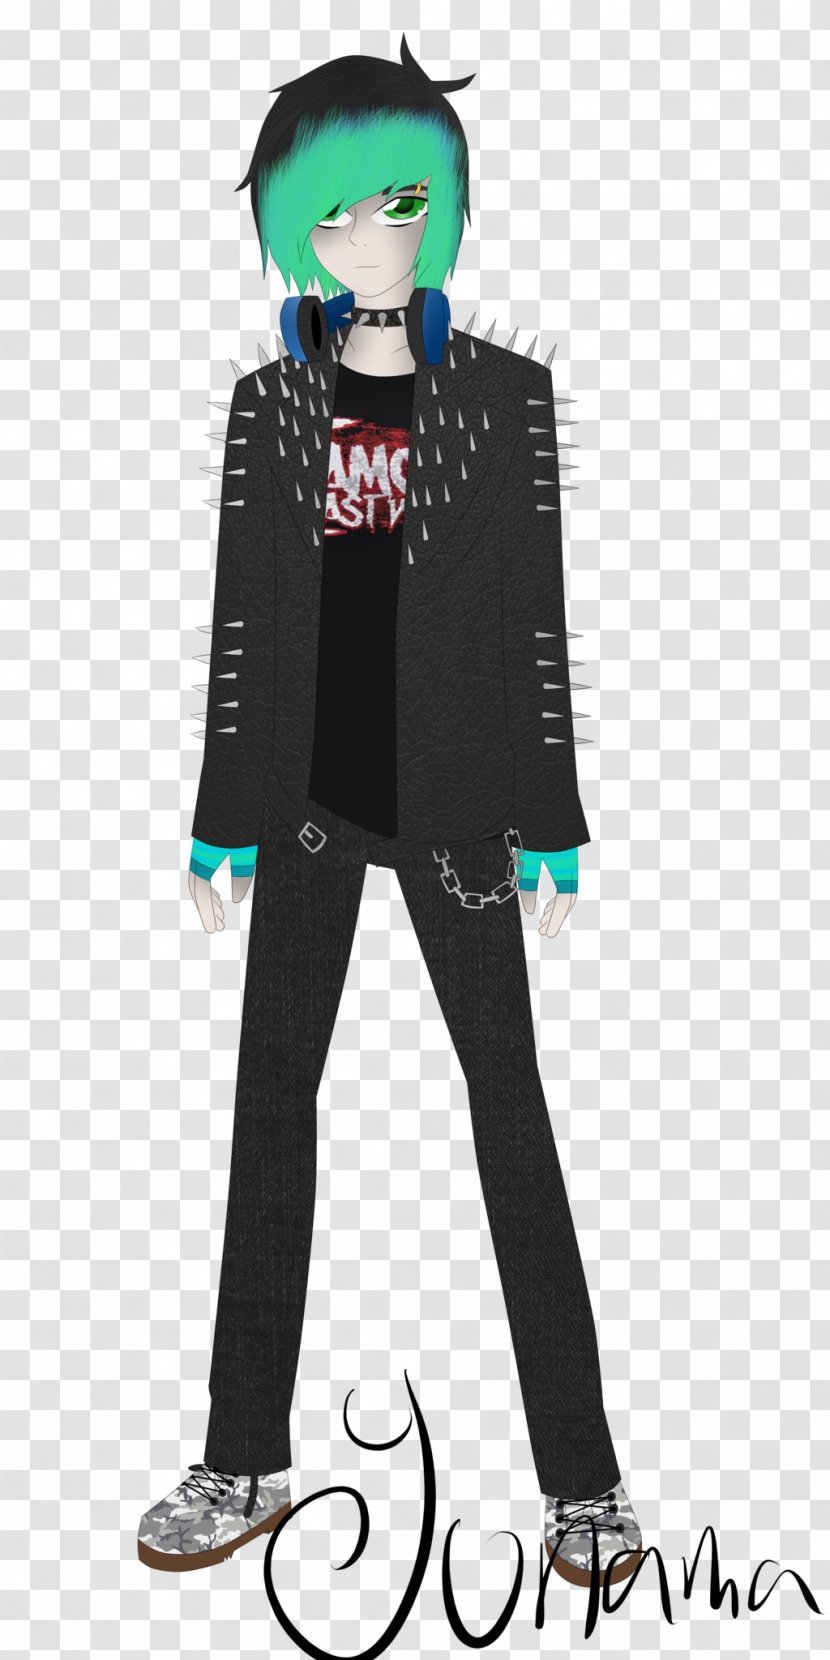 Costume Design Character Outerwear - Neverwinther Concept Transparent PNG